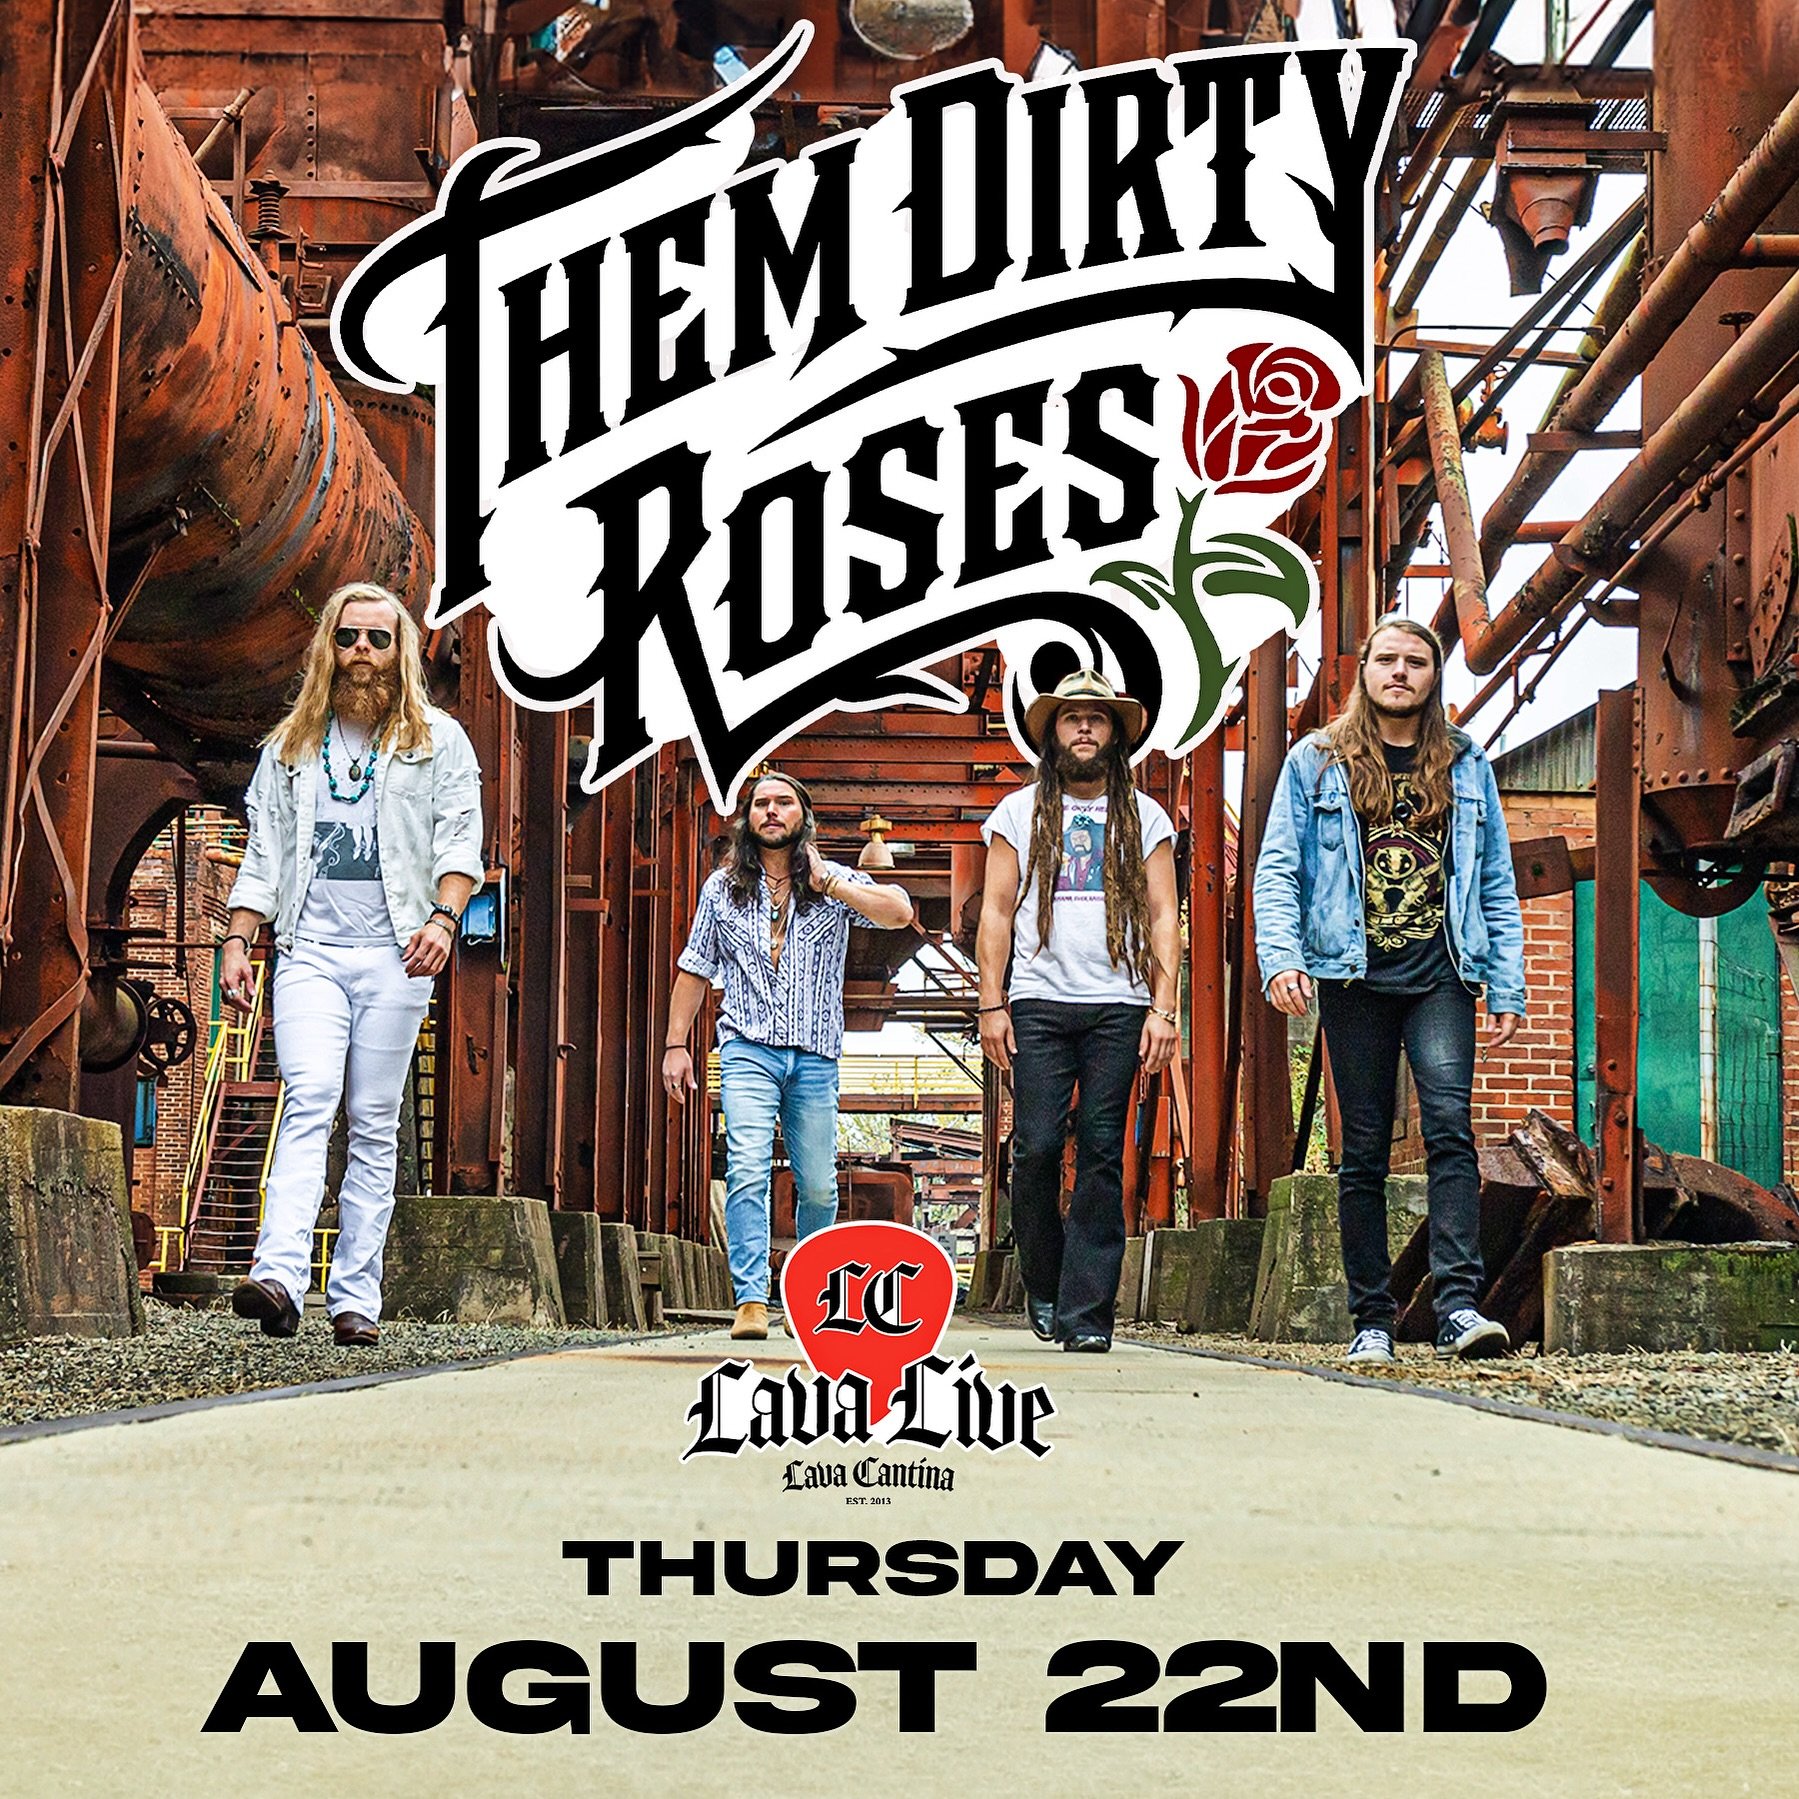 🚨 TICKETS ON SALE ➡️ LavaCantina.com 🚨

🔥We are very excited to announce Them Dirty Roses will be taking over the main stage at Lave Live on Thursday, August 22nd starting at 7PM! 🔥

👀General Admission for this show is CHARGED. Reserved seating 